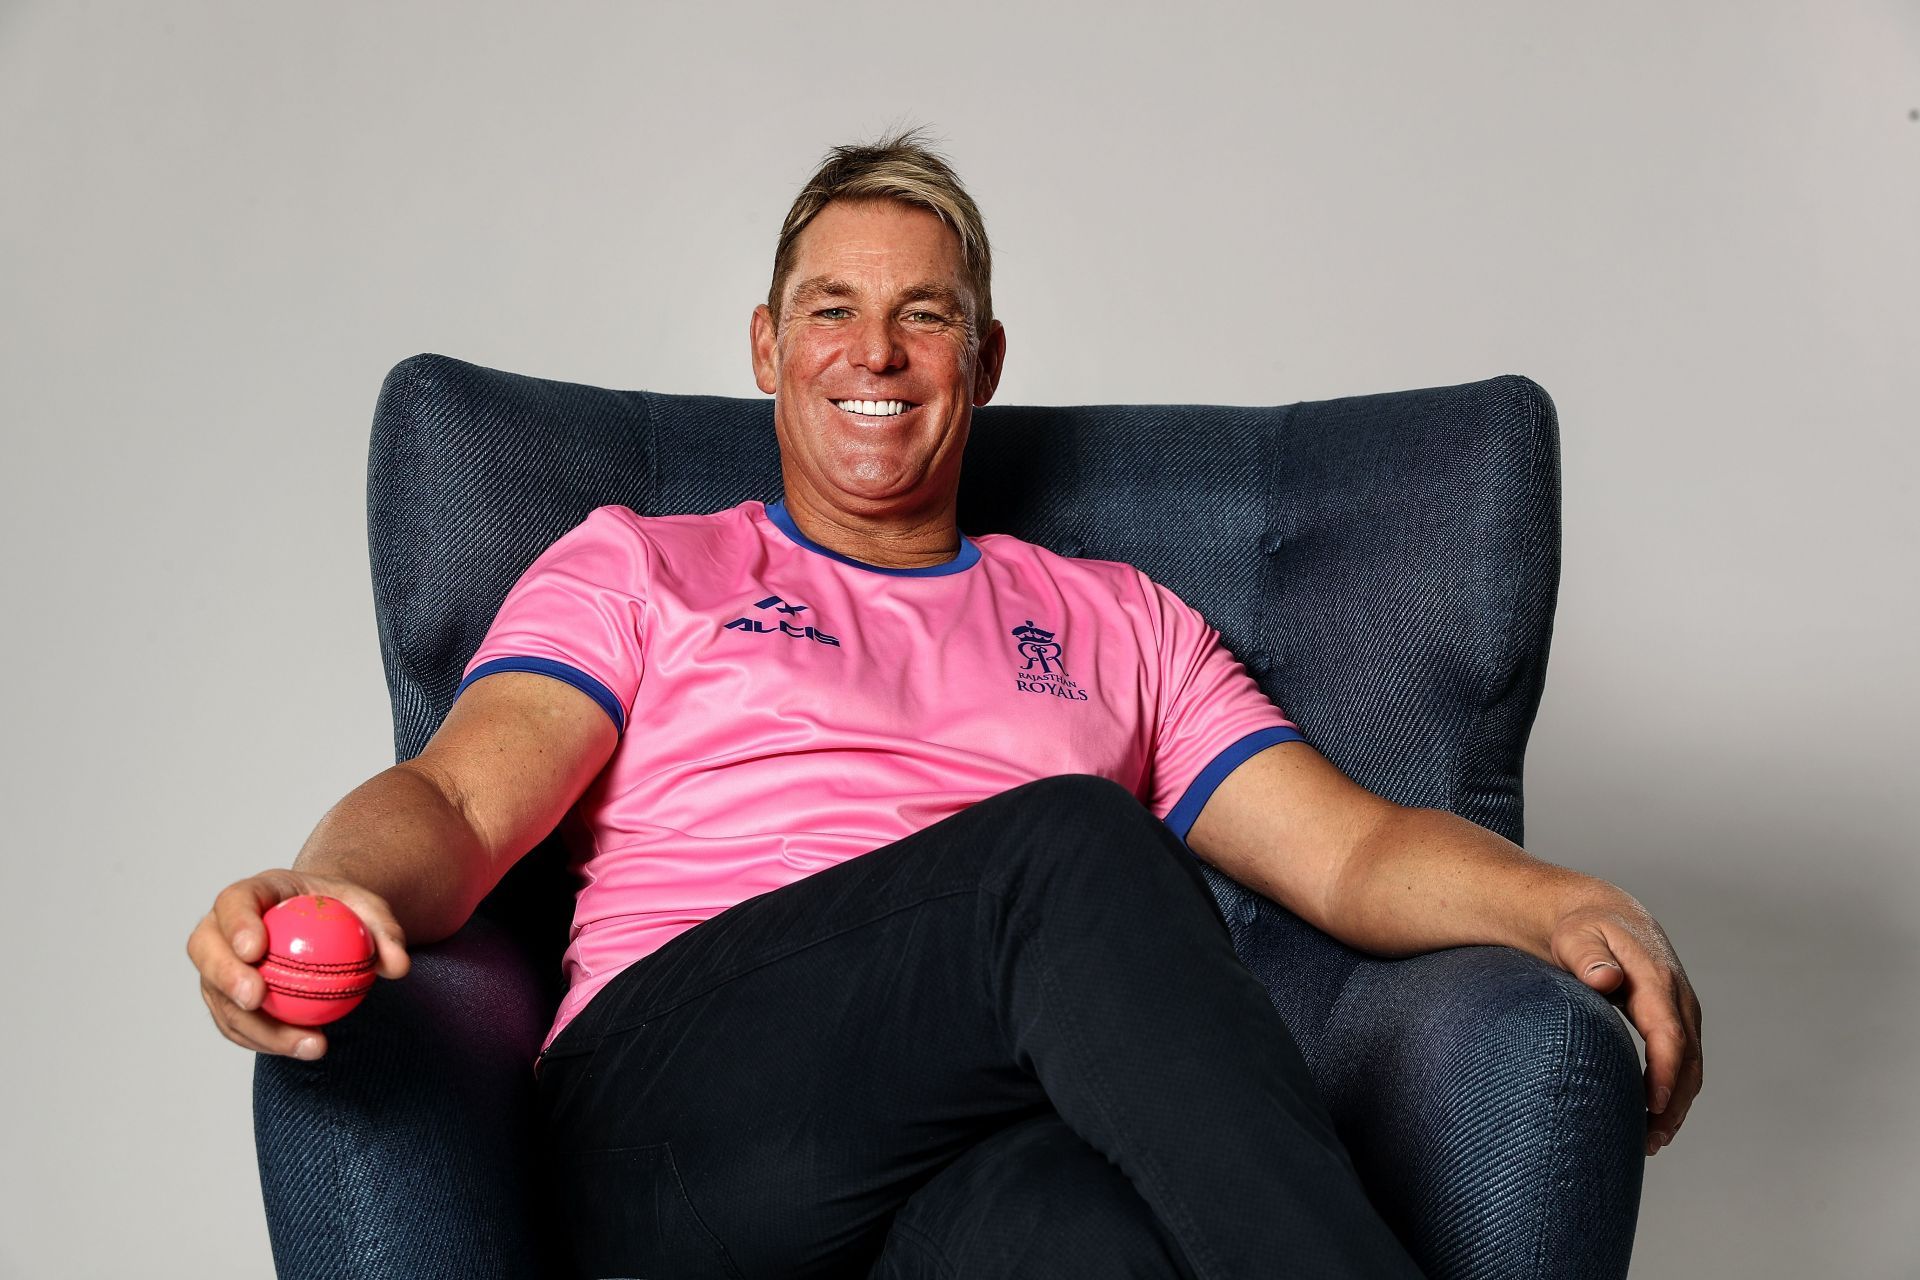 Shane Warne led the Rajasthan Royals to the inaugural IPL title.